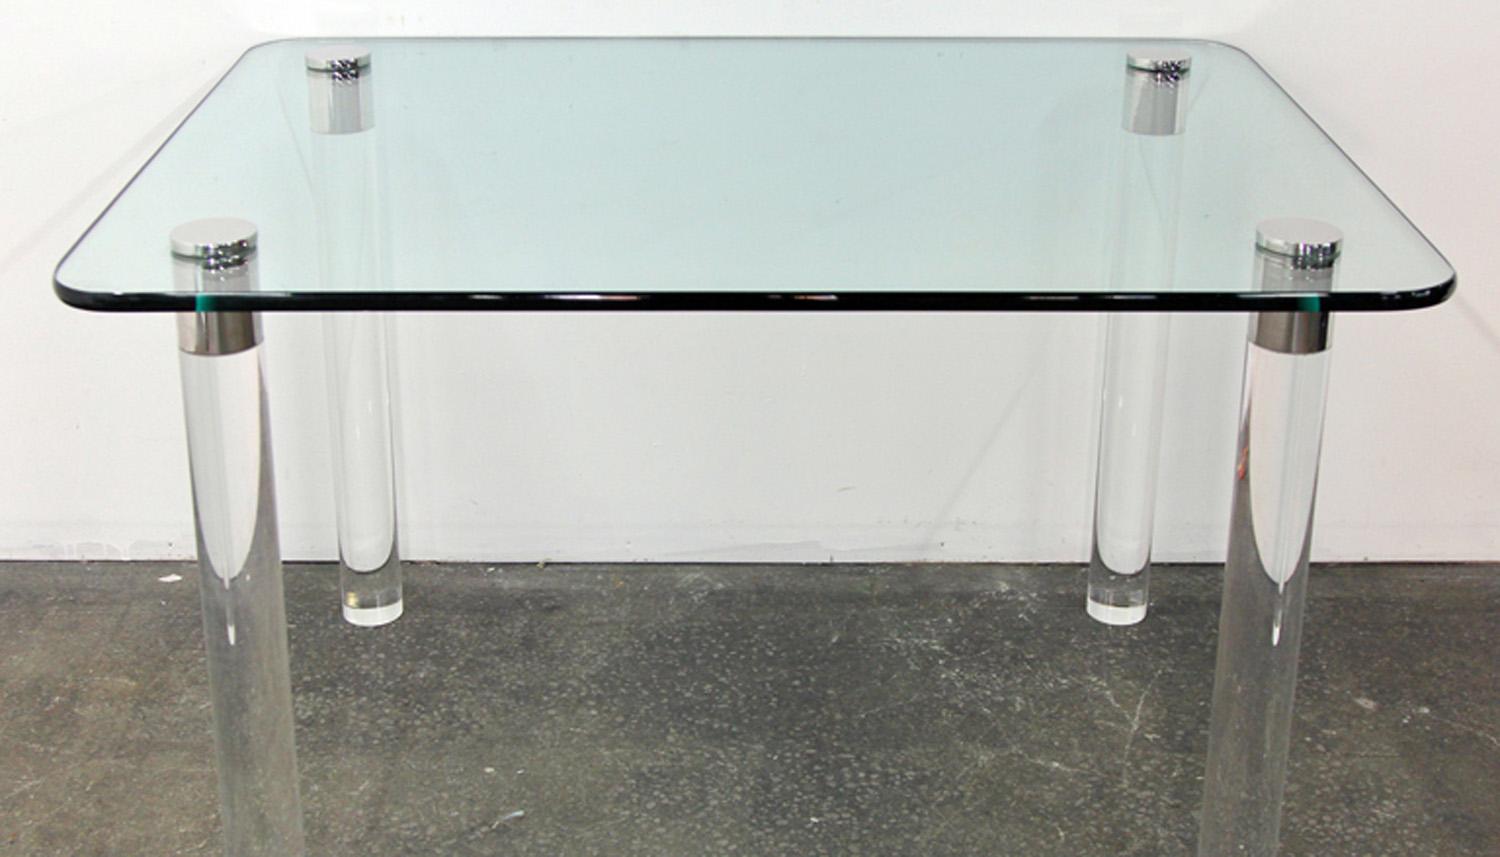 Gorgeous and light midcentury table. Lucite legs capped over the top with chrome. Legs easily removed for shipping. Beautiful statement piece.